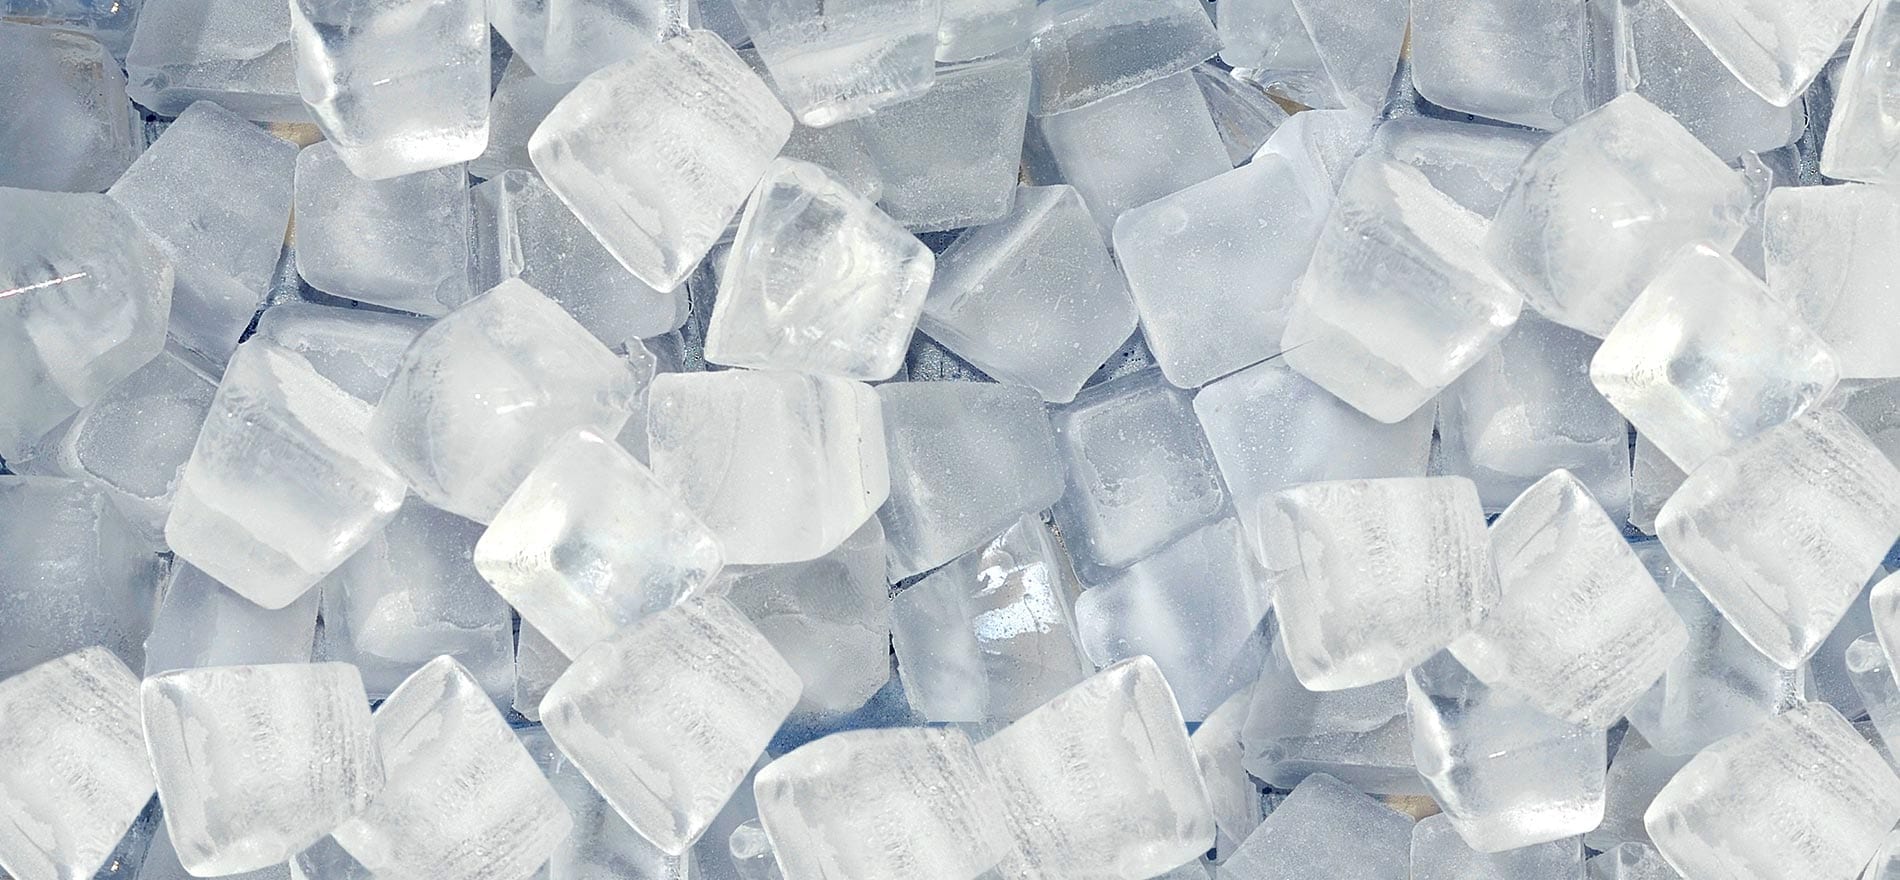 https://www.easyice.com/wp-content/uploads/2019/01/Cubed_Ice_Commercial_Ice_Machines_Nugs.jpg